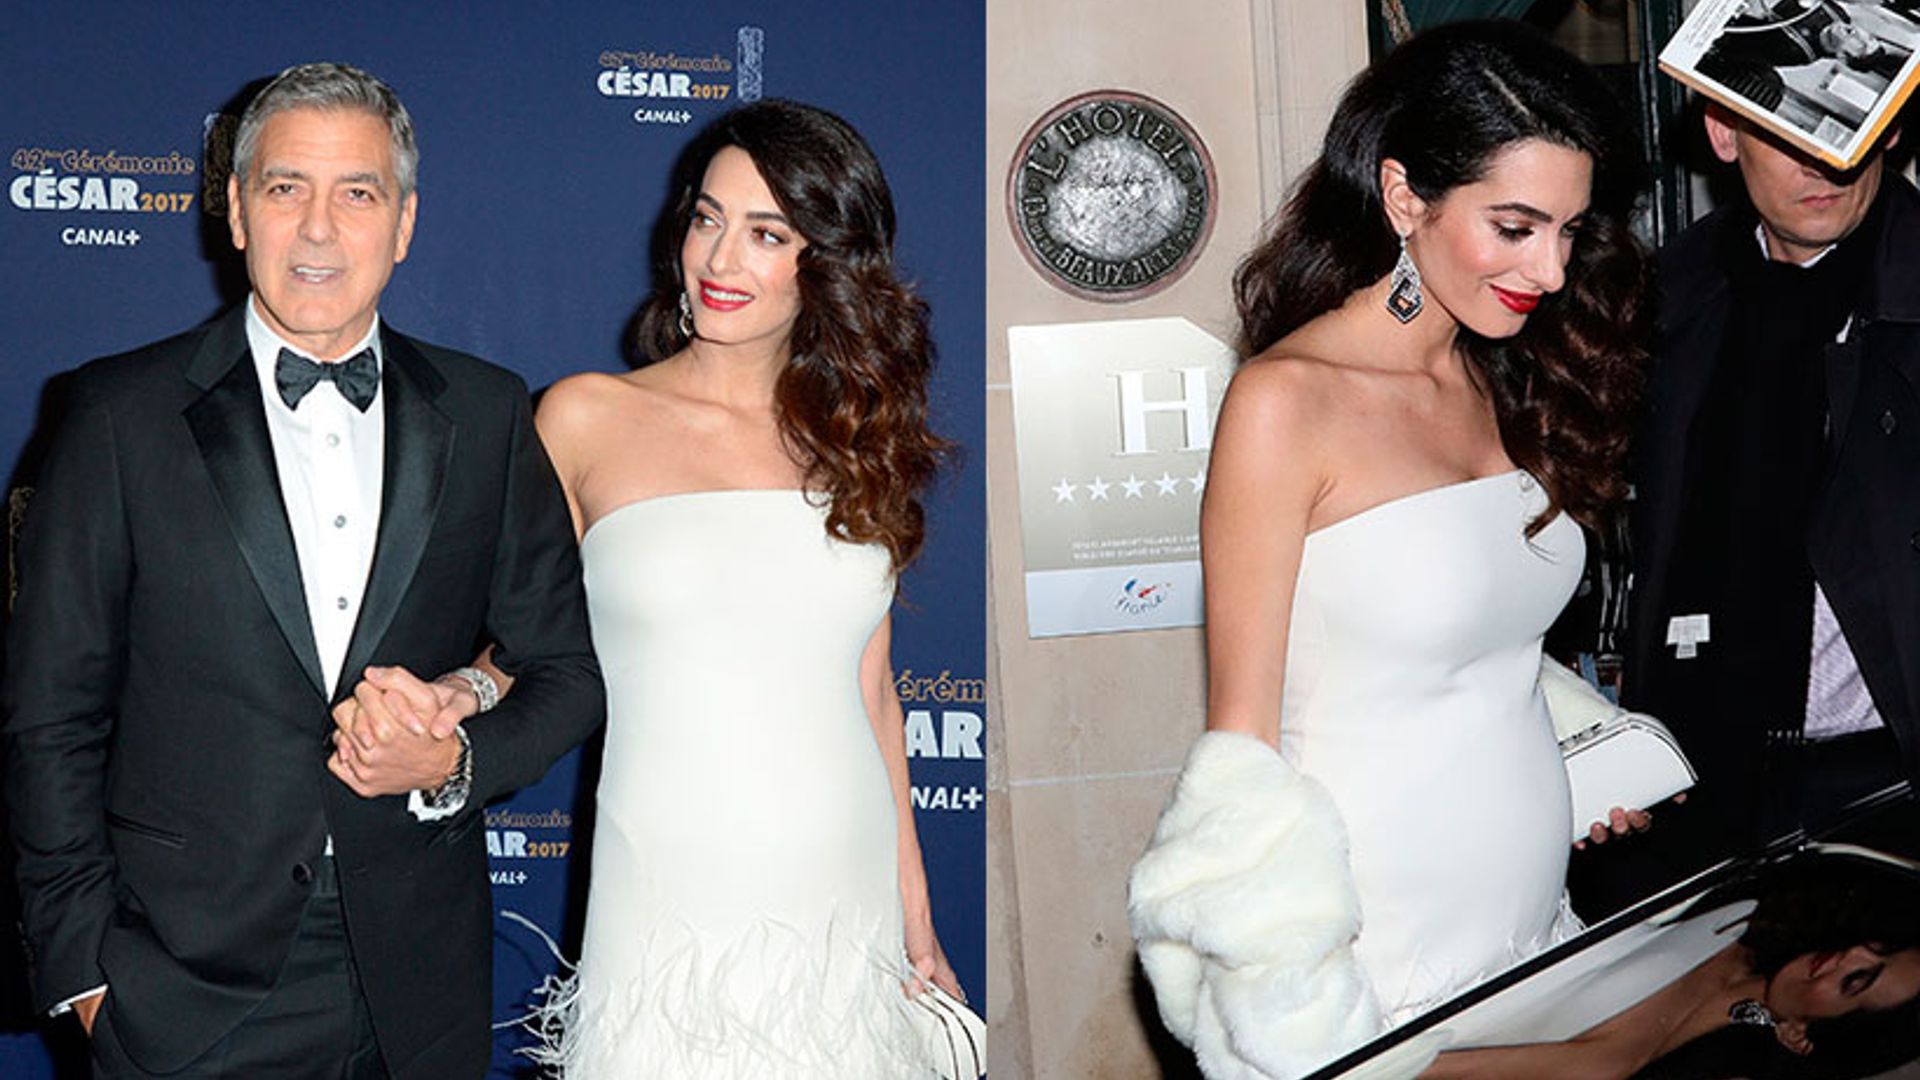 Amal Clooney makes first red carpet appearance since pregnancy news - see her bump!